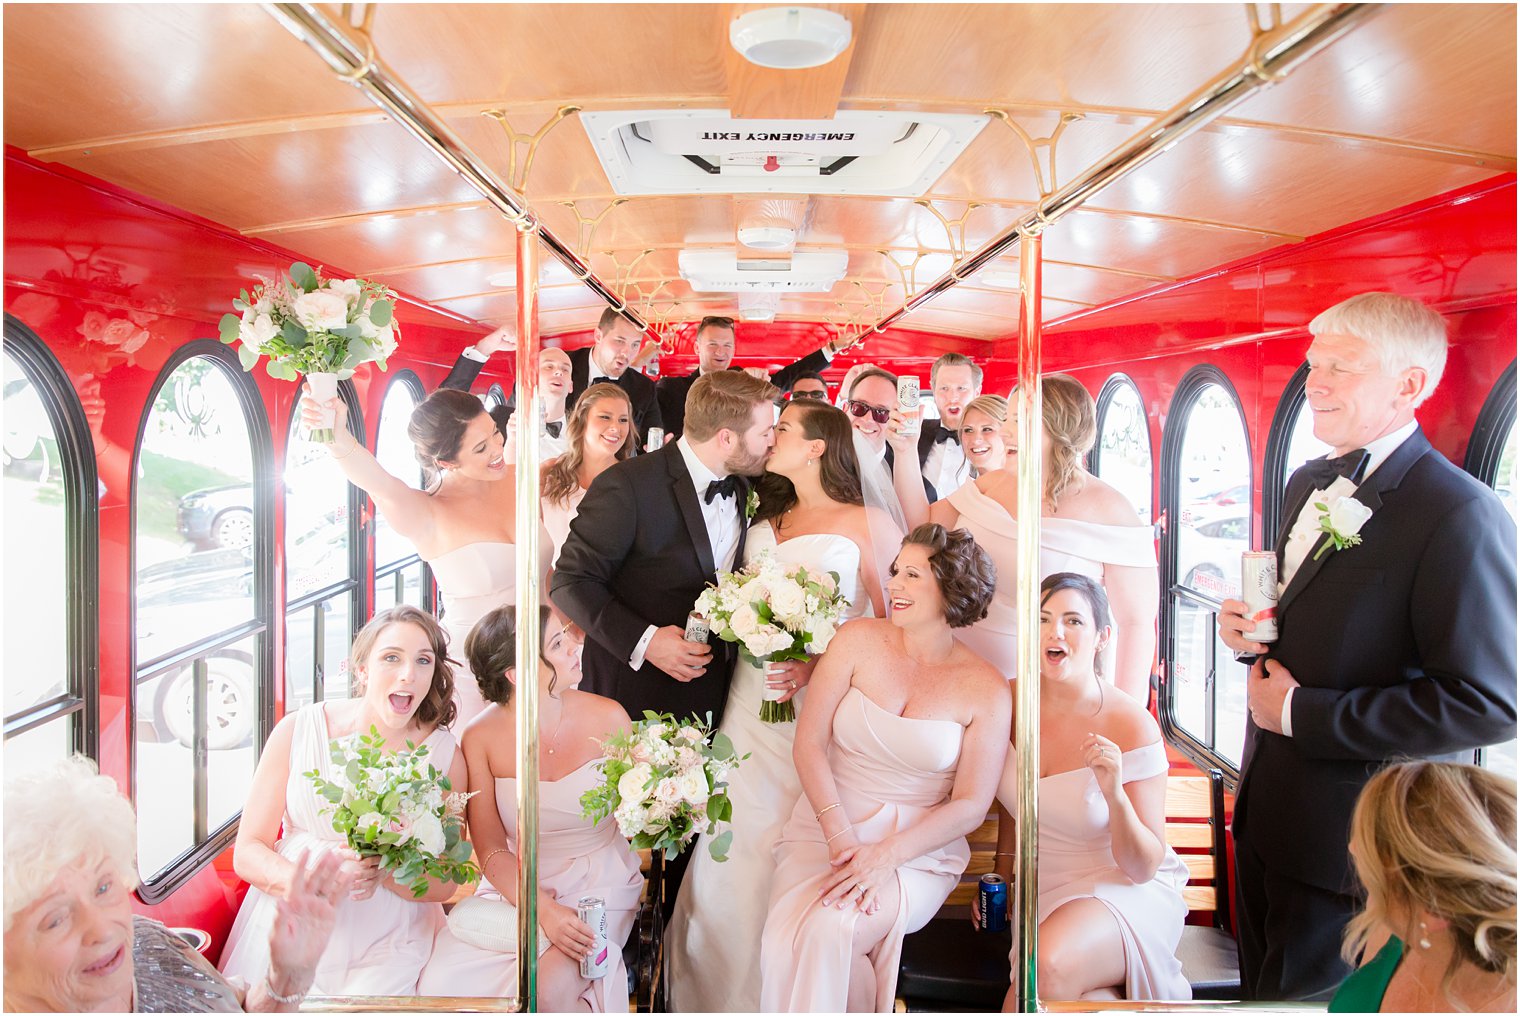 Bride and groom kissing in trolley after wedding ceremony in St. Luke's Church in Ho-Ho-Kus